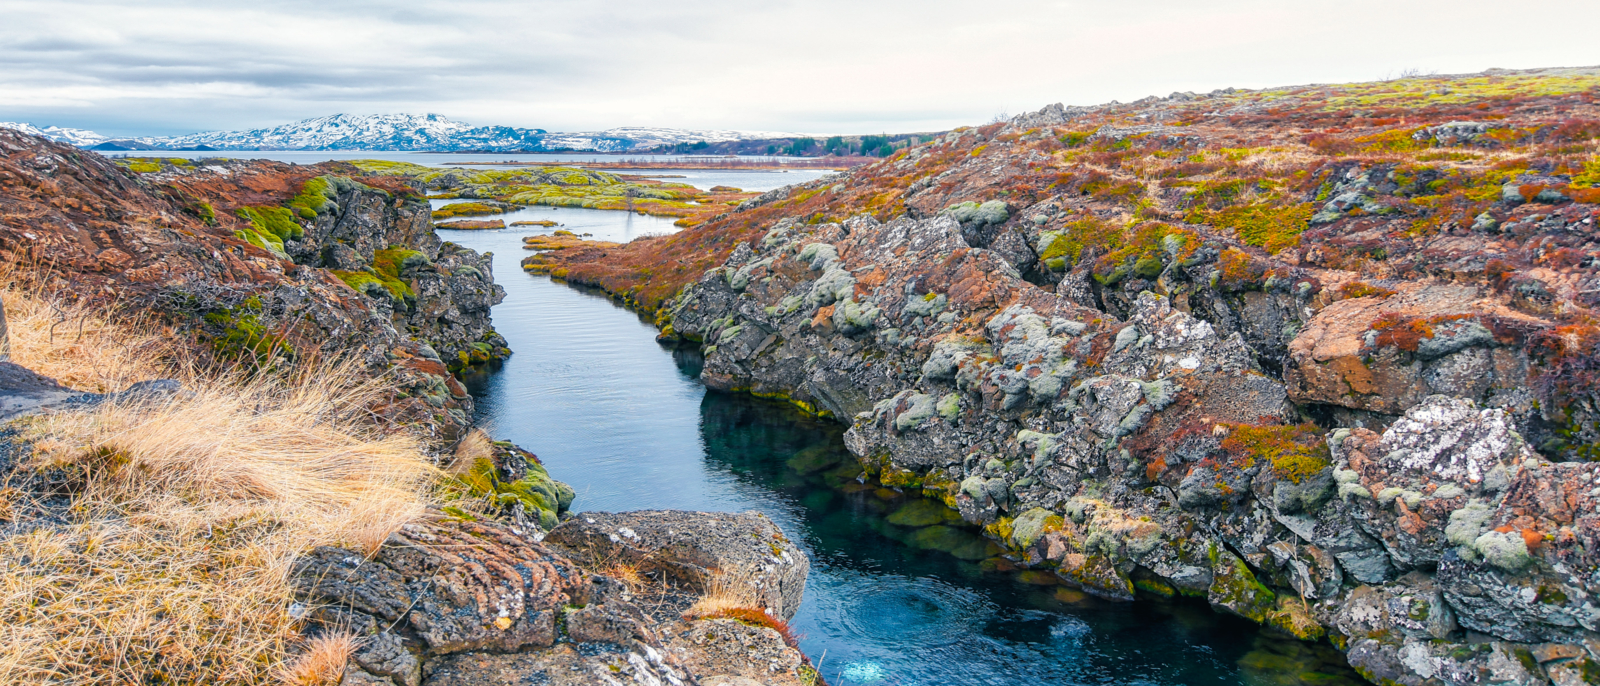 A fissure between the American and Eurasian tectonic plates, Silfra has some of the clearest water on earth